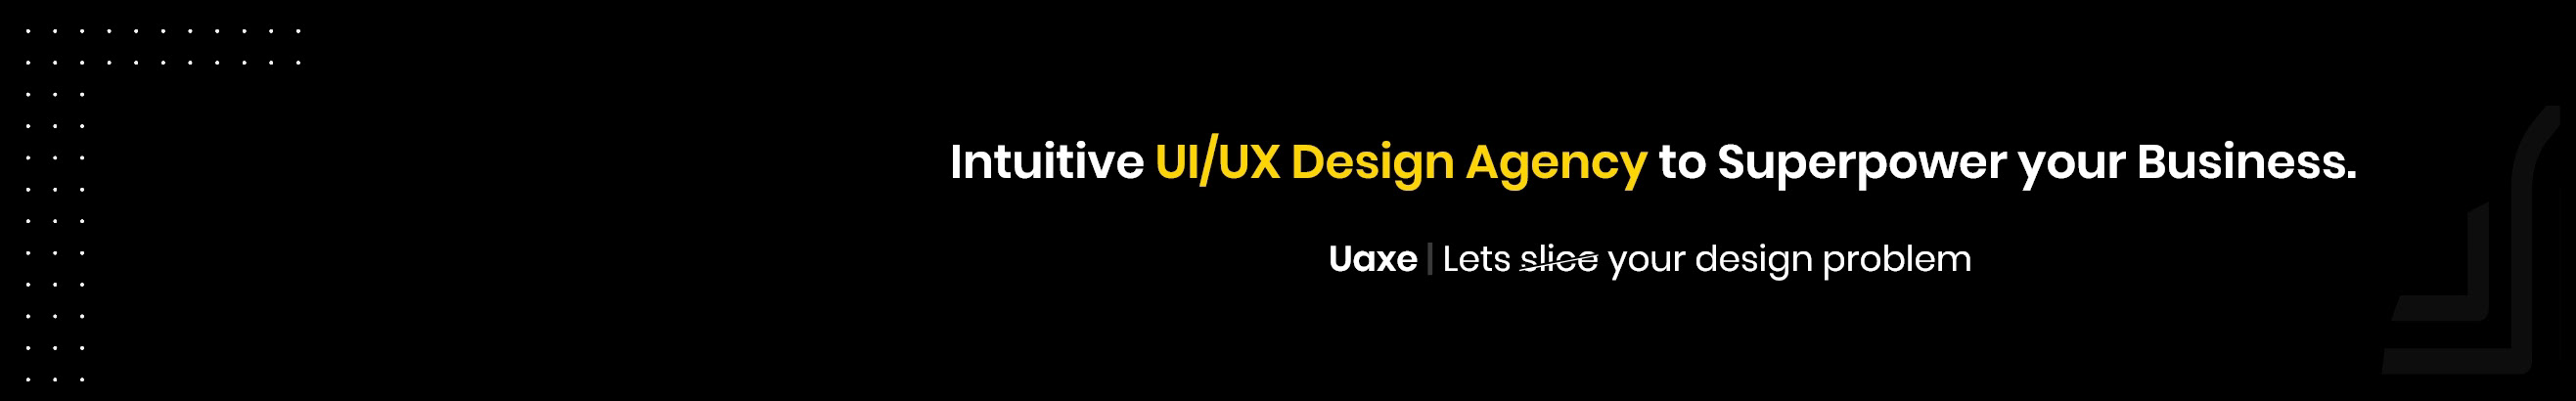 Uaxe Labs's profile banner